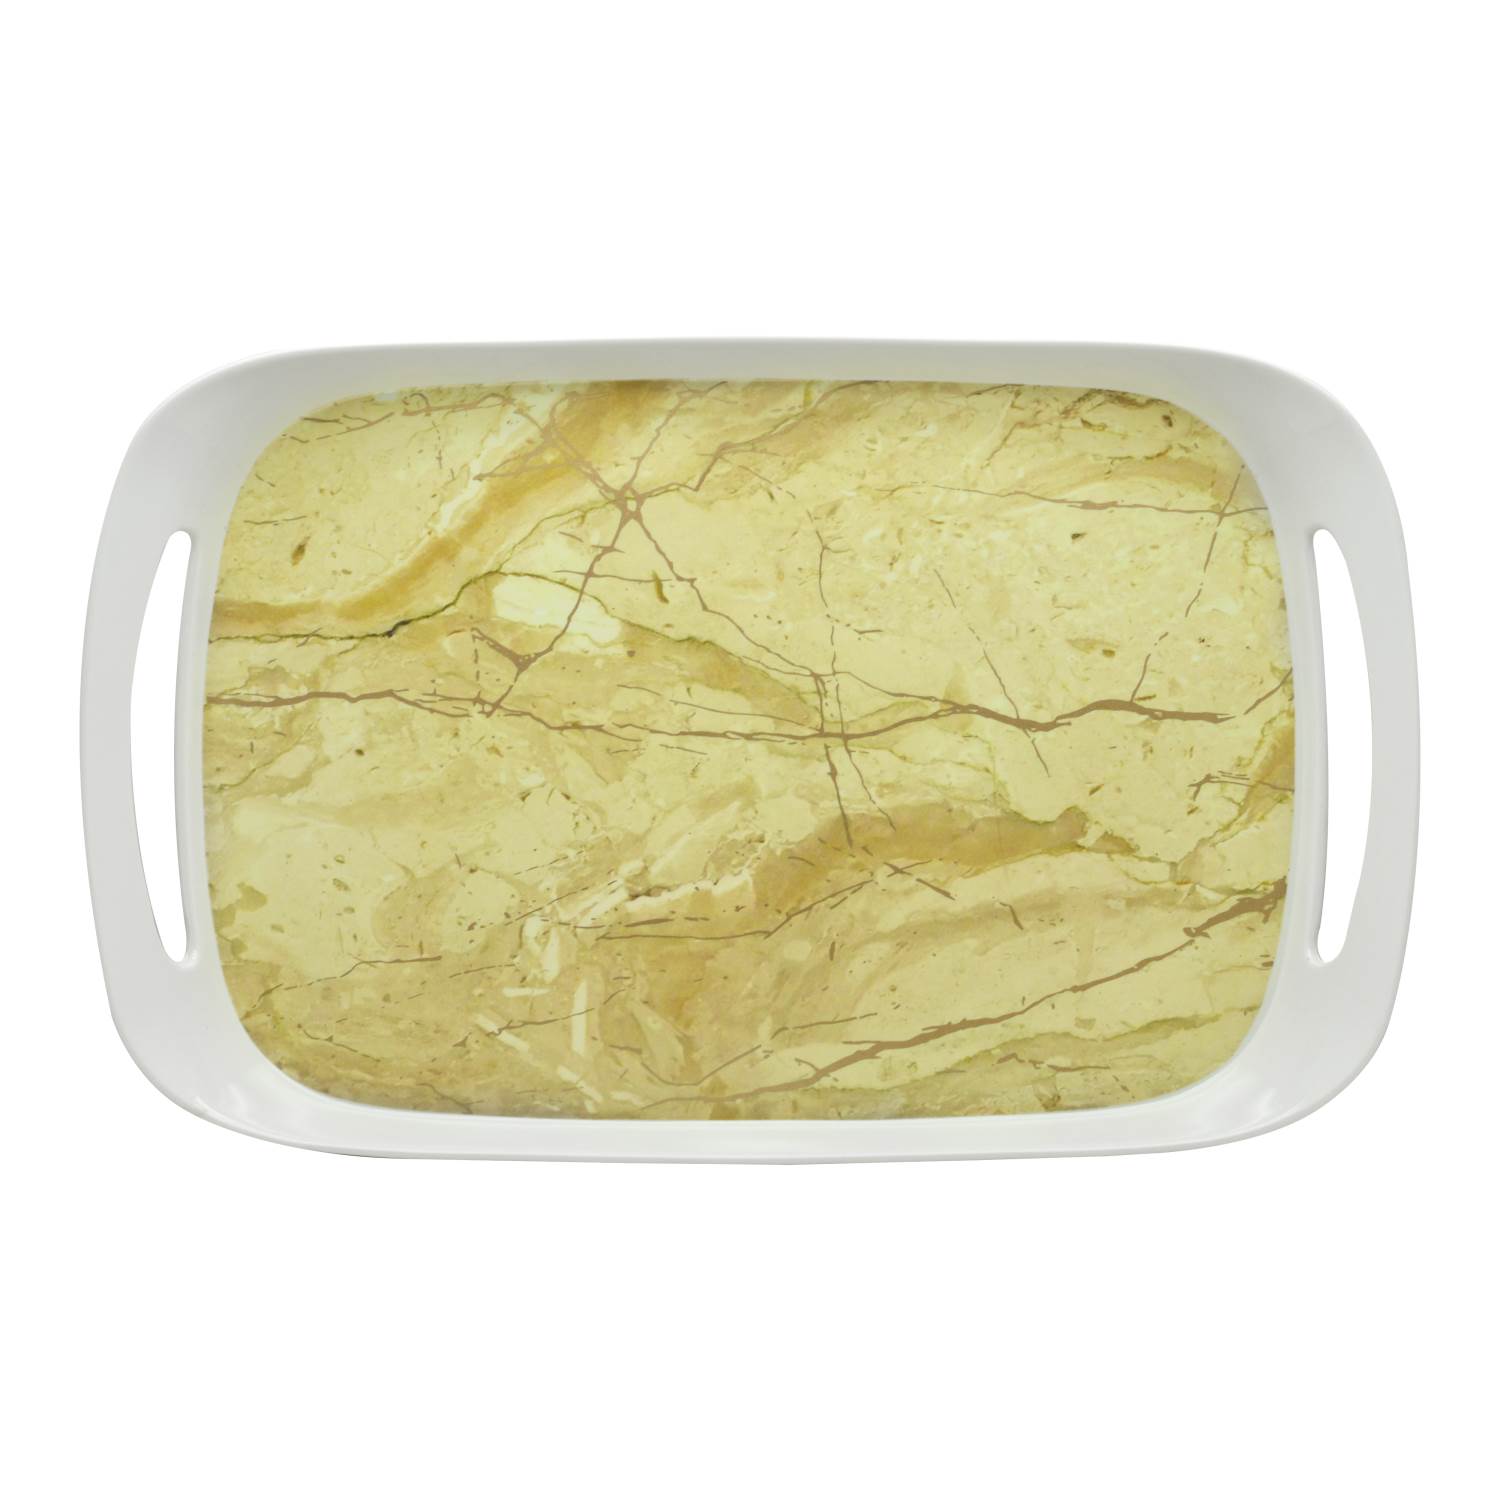 Rk Comfort Tray Large Beige Static Gold, Dwt1072Beg, 16.25" X 10.25"